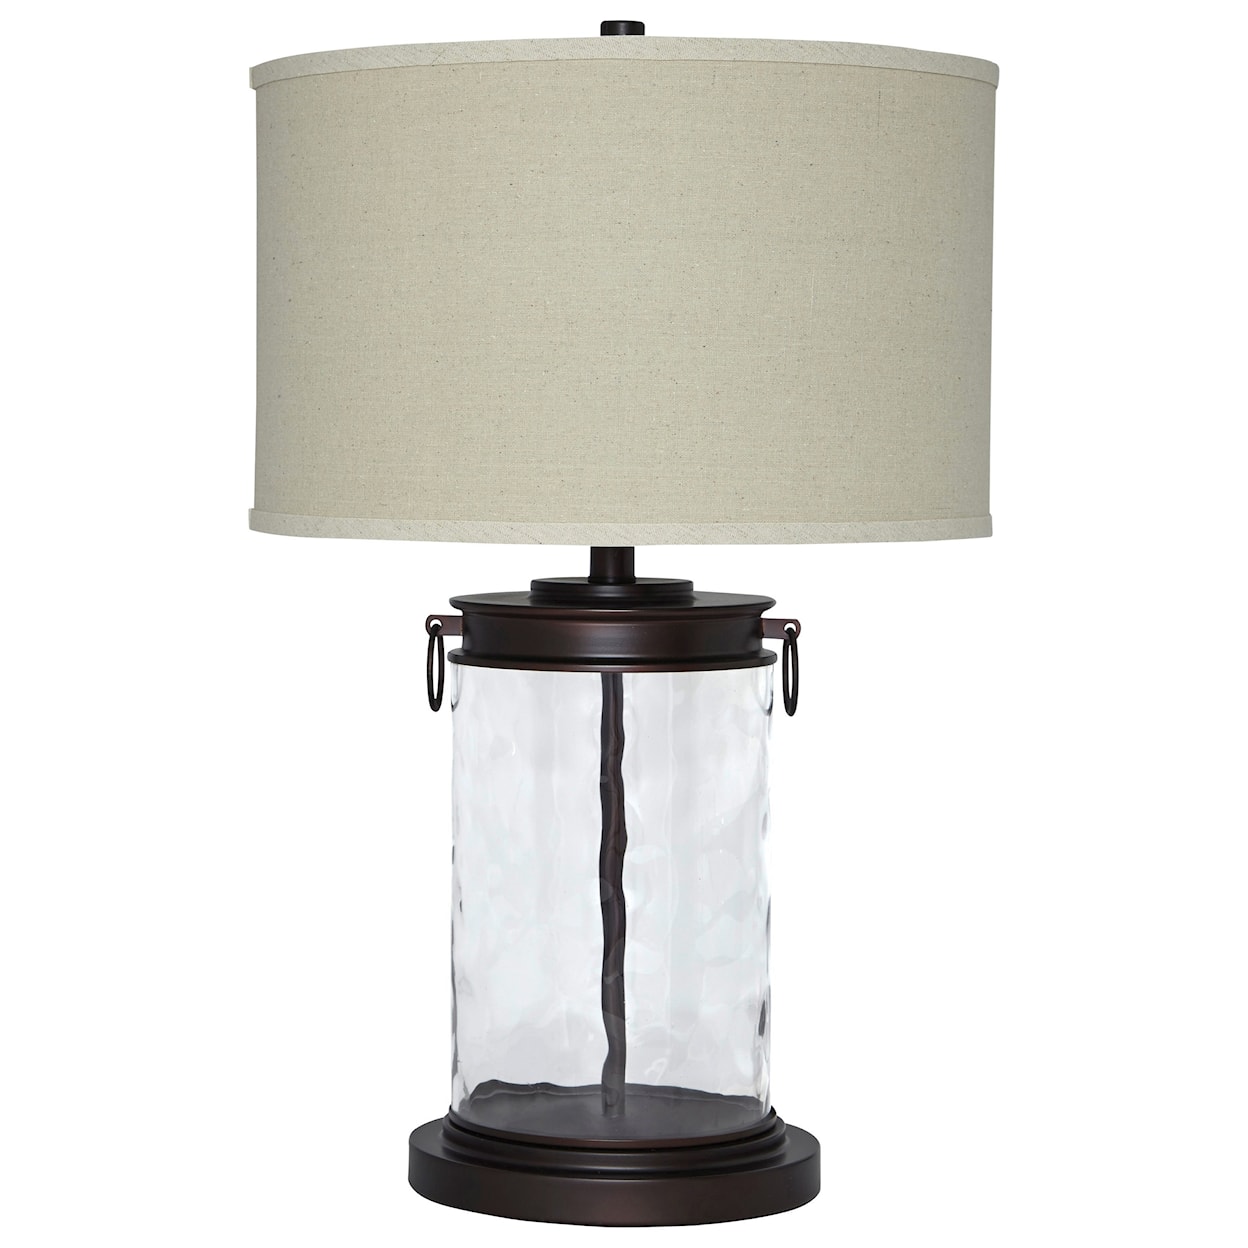 Signature Design by Ashley Lamps - Vintage Style Tailynn Clear/Bronze Finish Glass Table Lamp